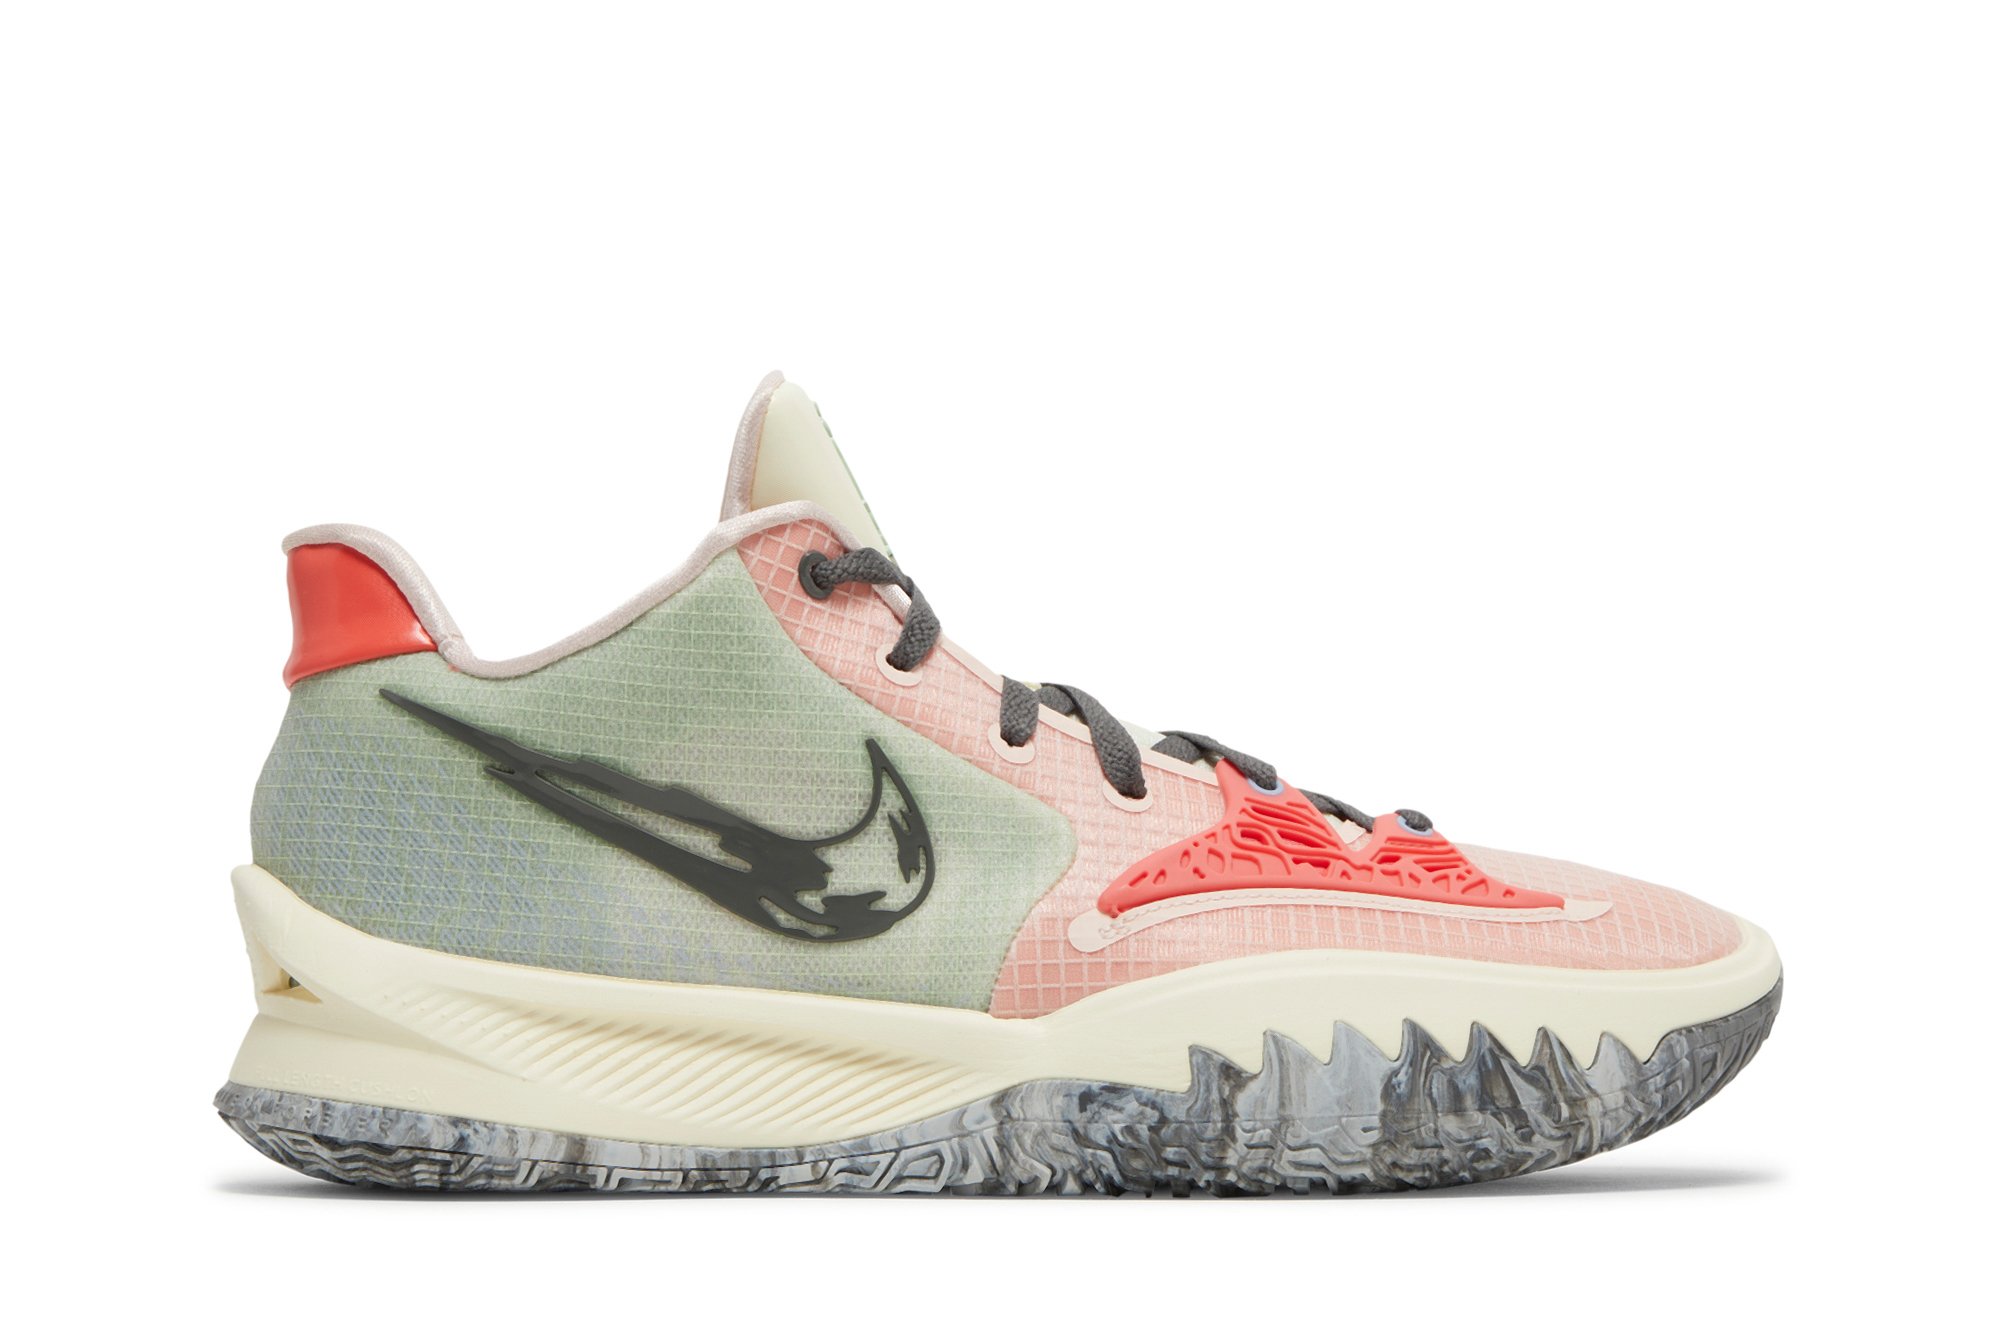 Buy Kyrie Low 4 EP 'Pale Coral' - CZ0105 800 | GOAT